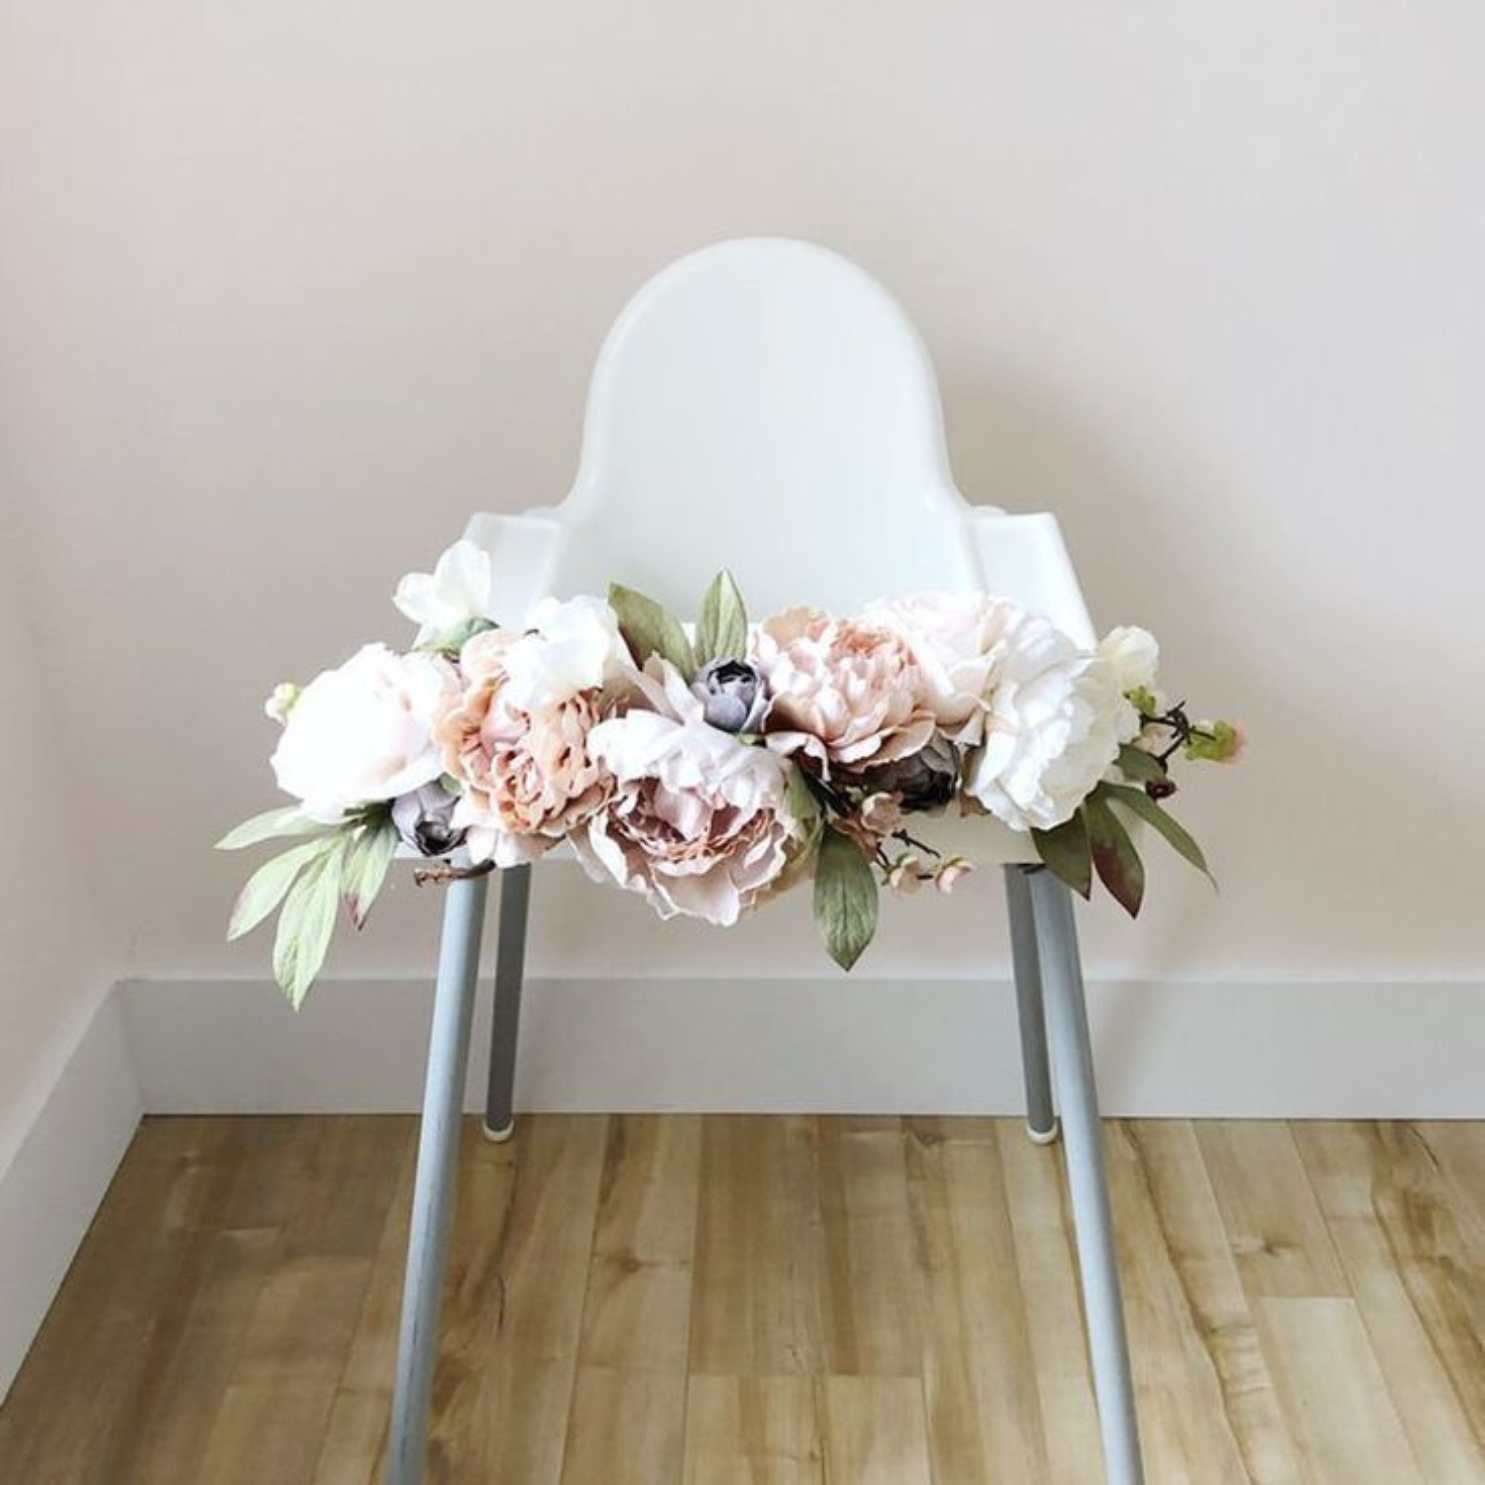 How To Make High Chair Garland